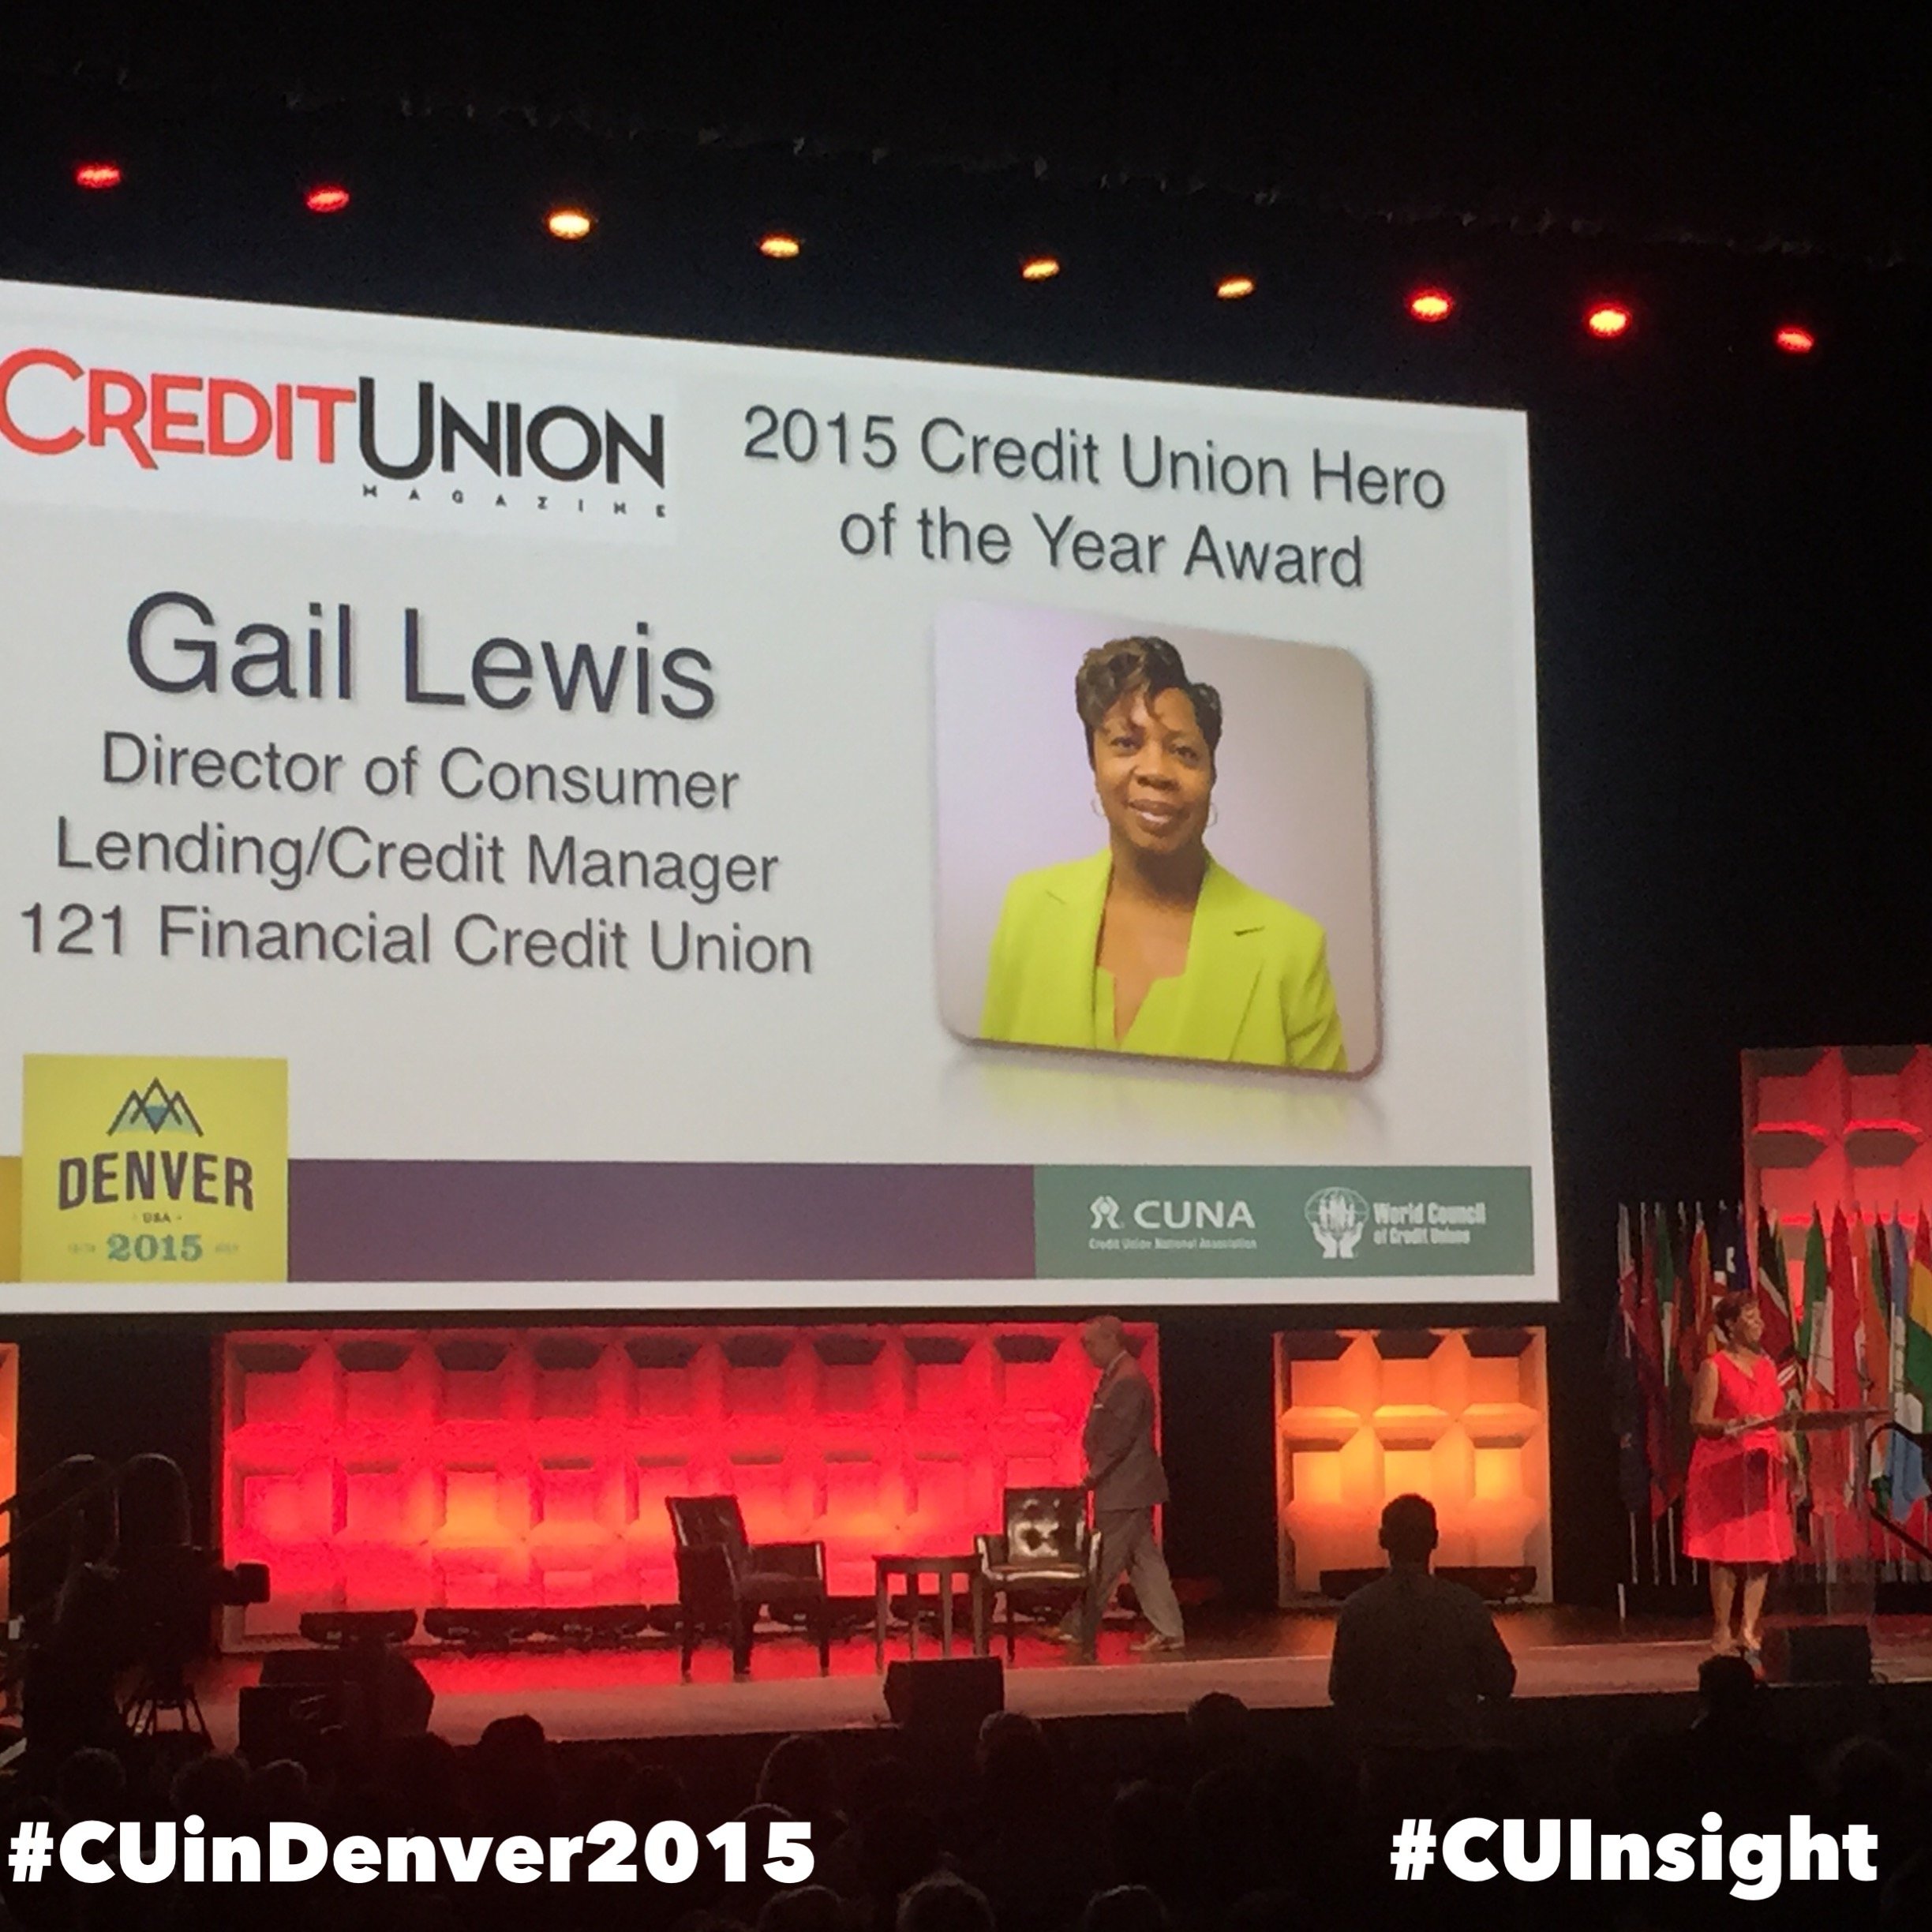 2015 Credit Union Hero of the Year Gail Lewis